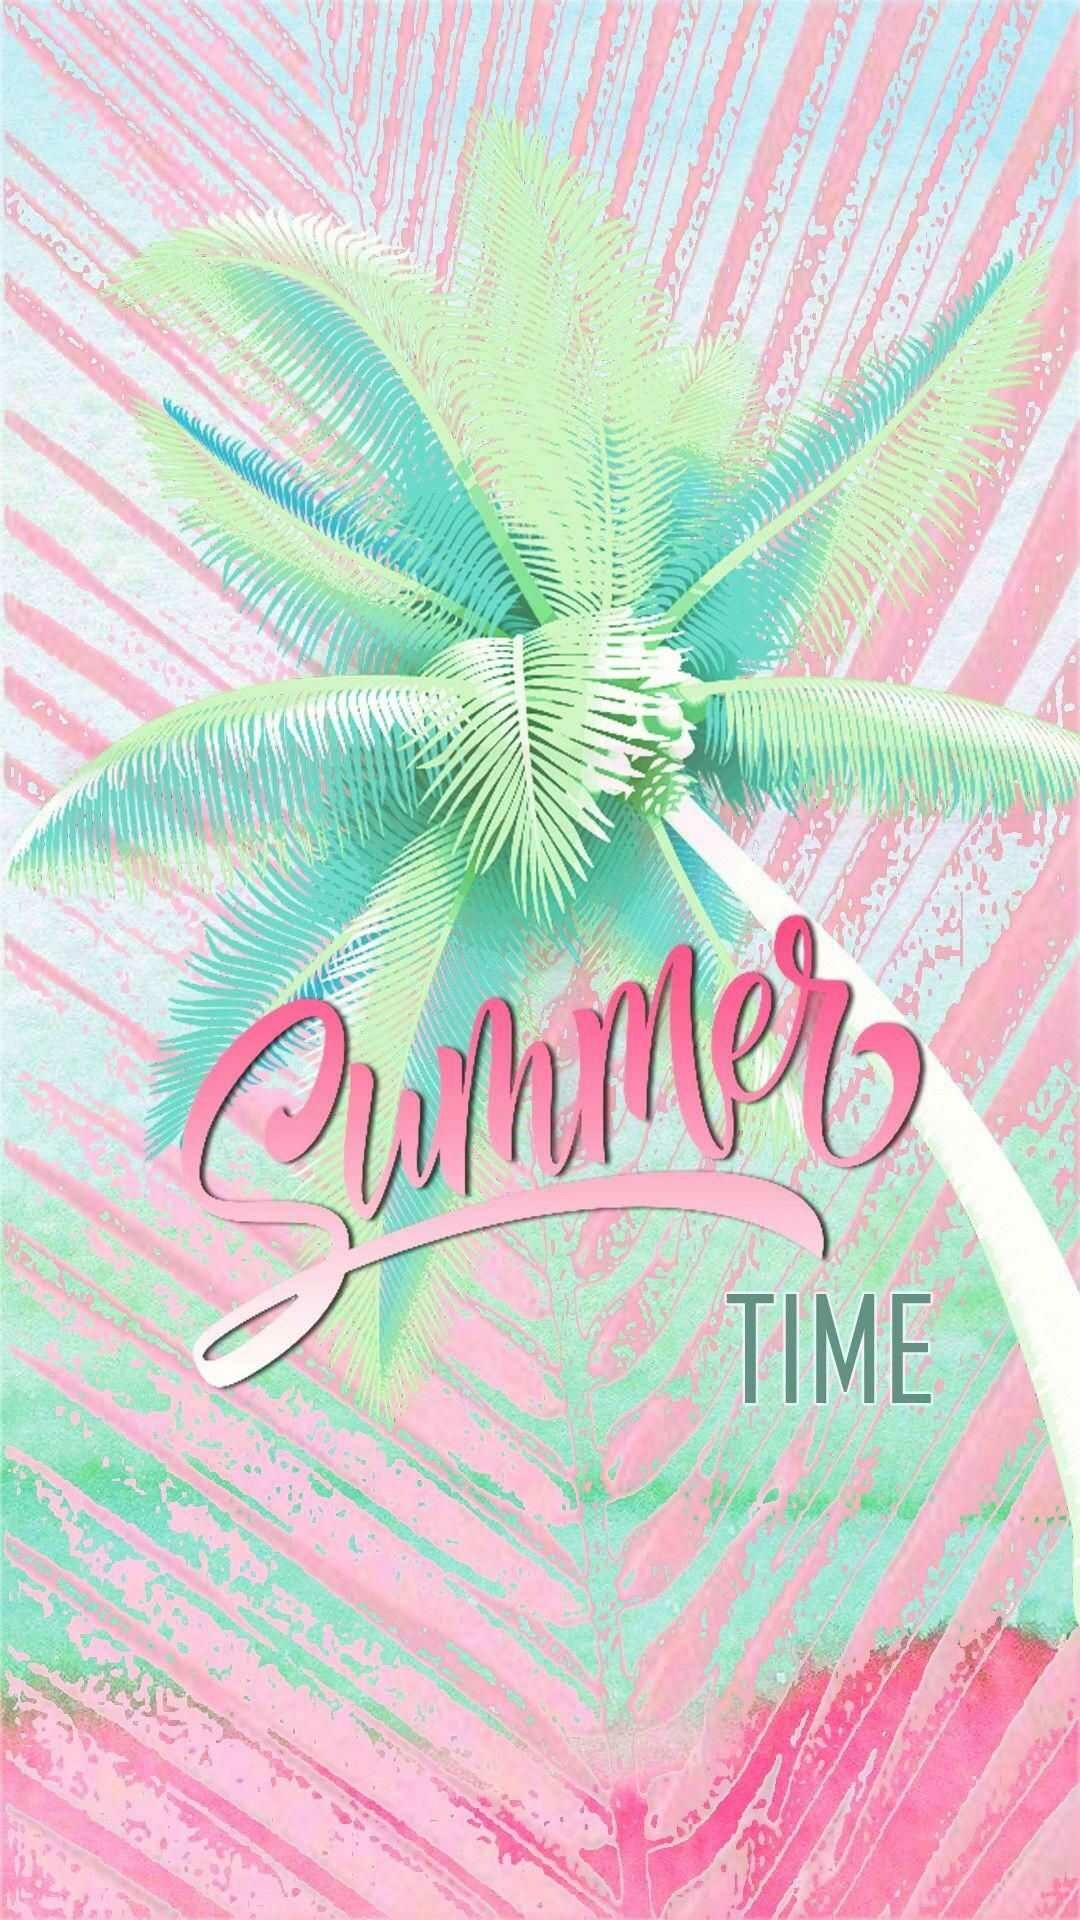 Summer: Summertime, The hottest season of the year. 1080x1920 Full HD Background.